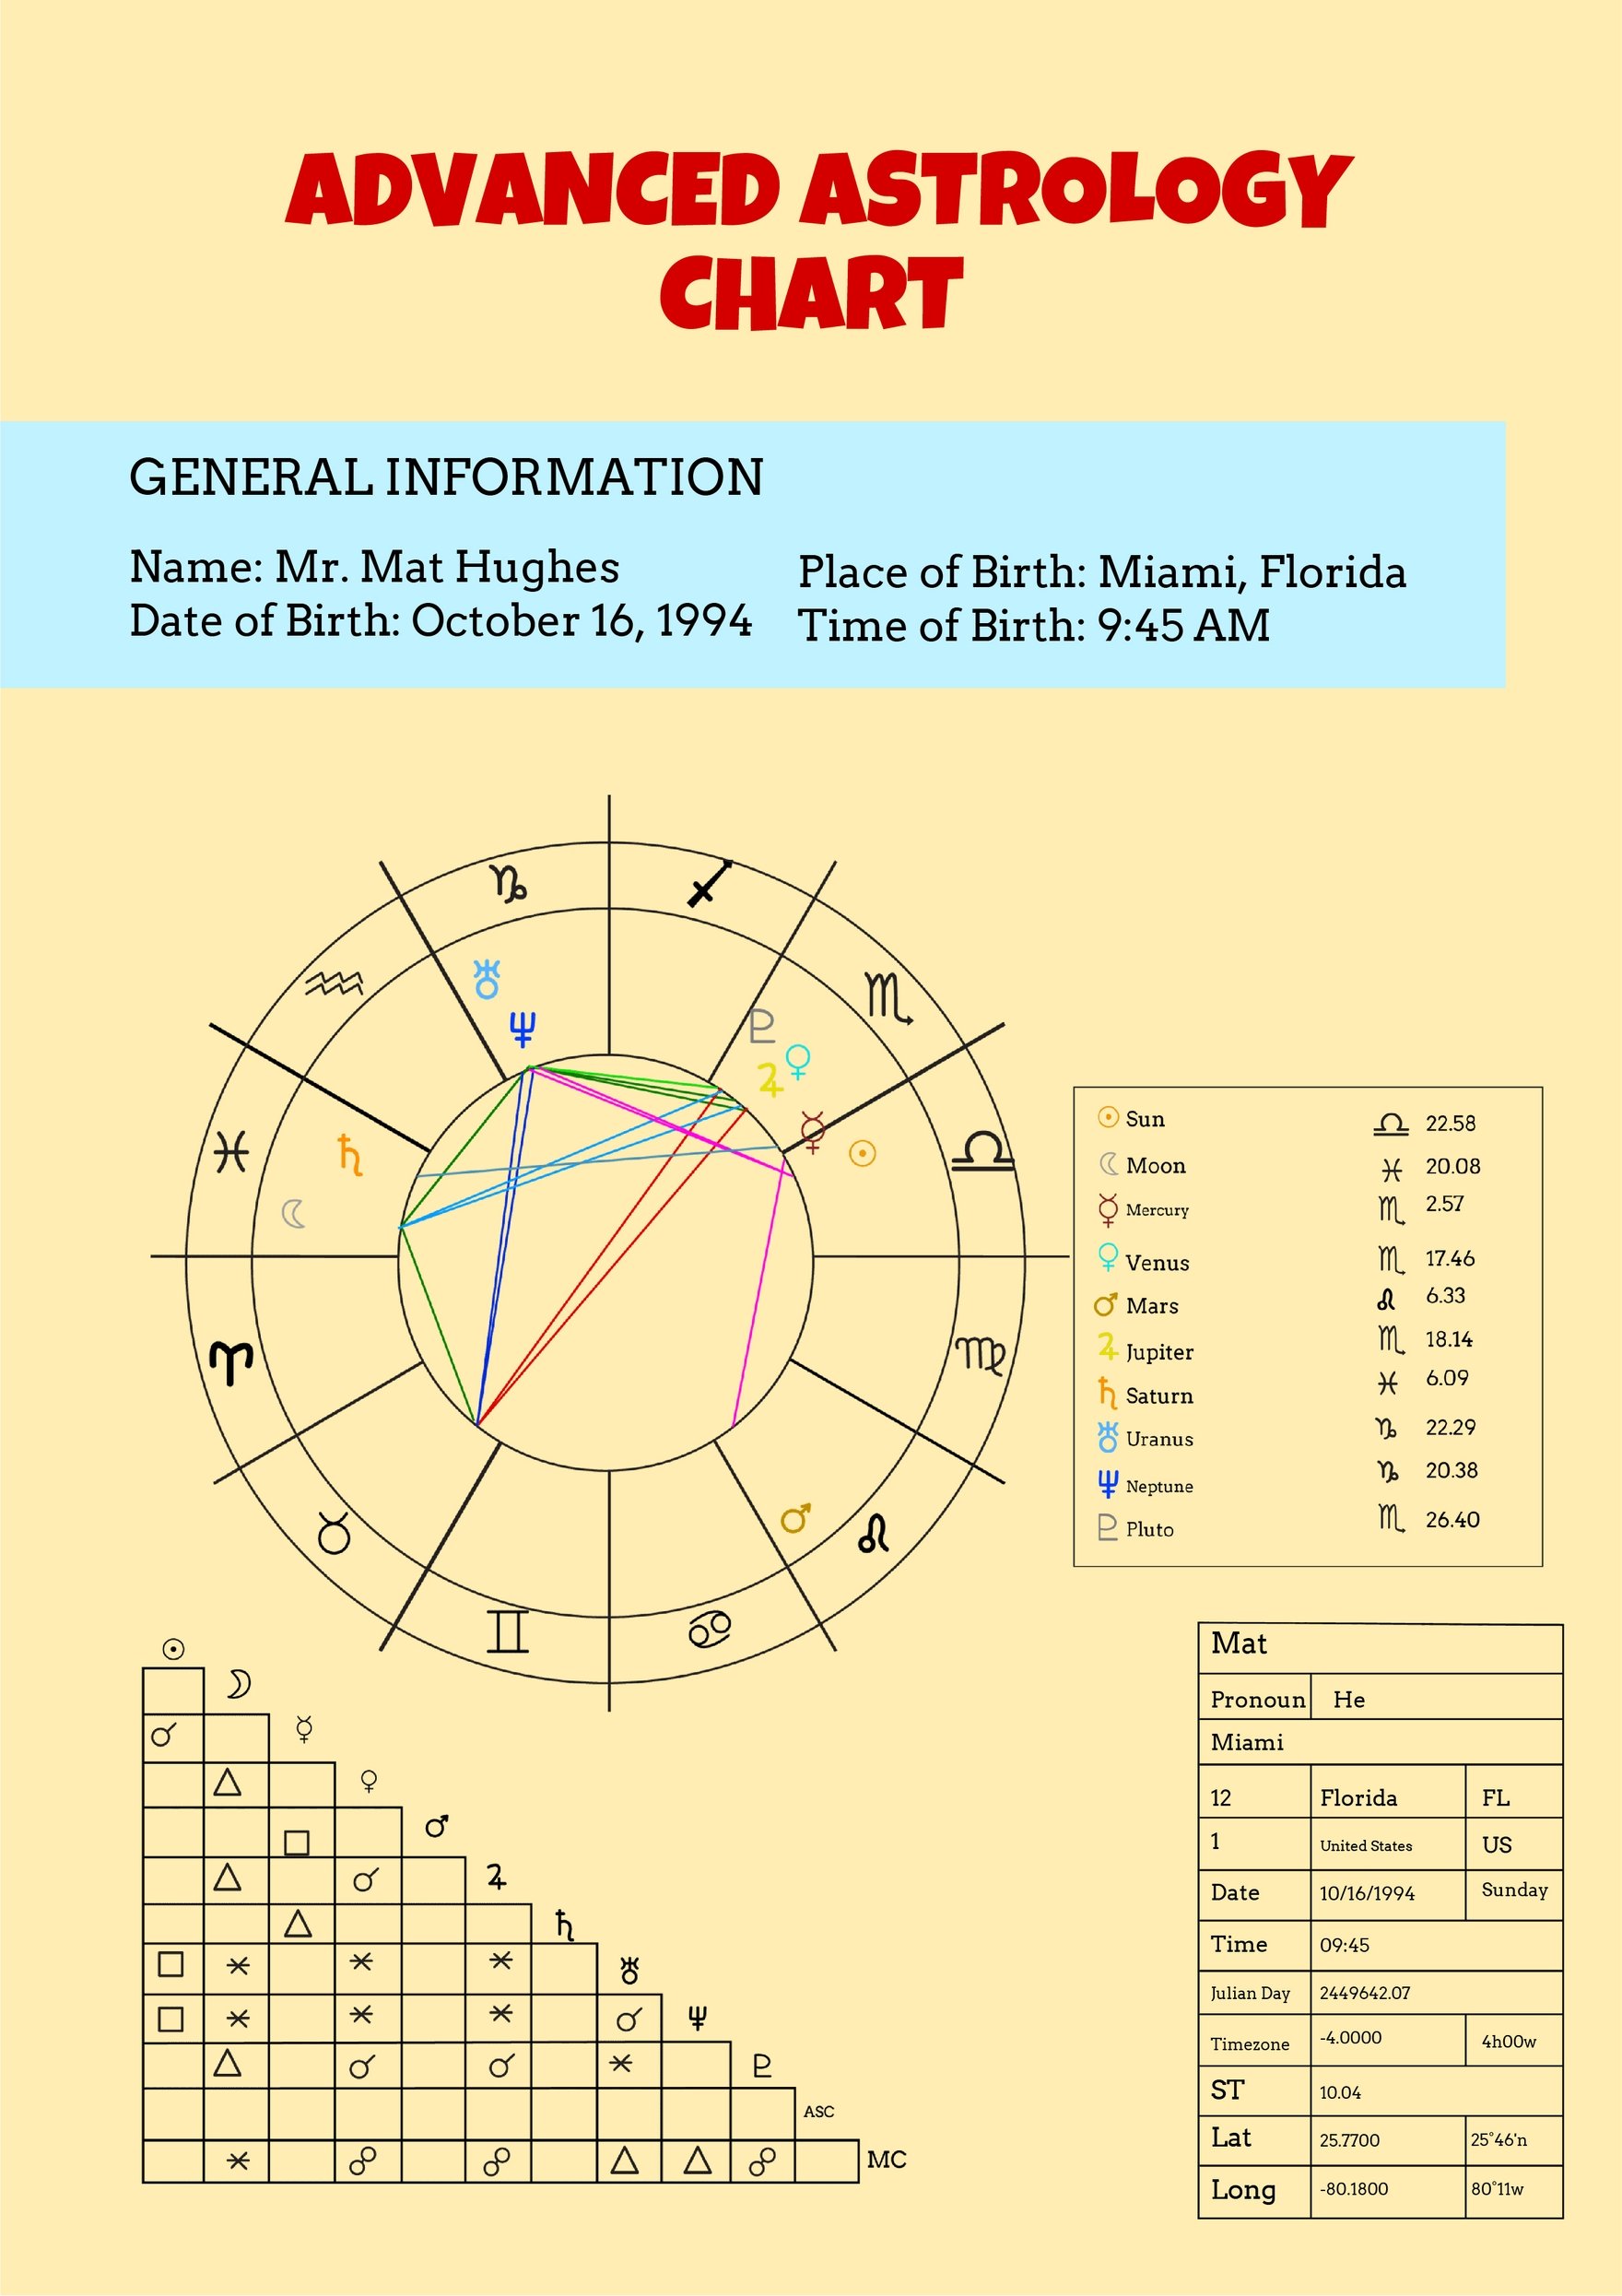 Free Advanced Astrology Chart Template in PDF, Illustrator